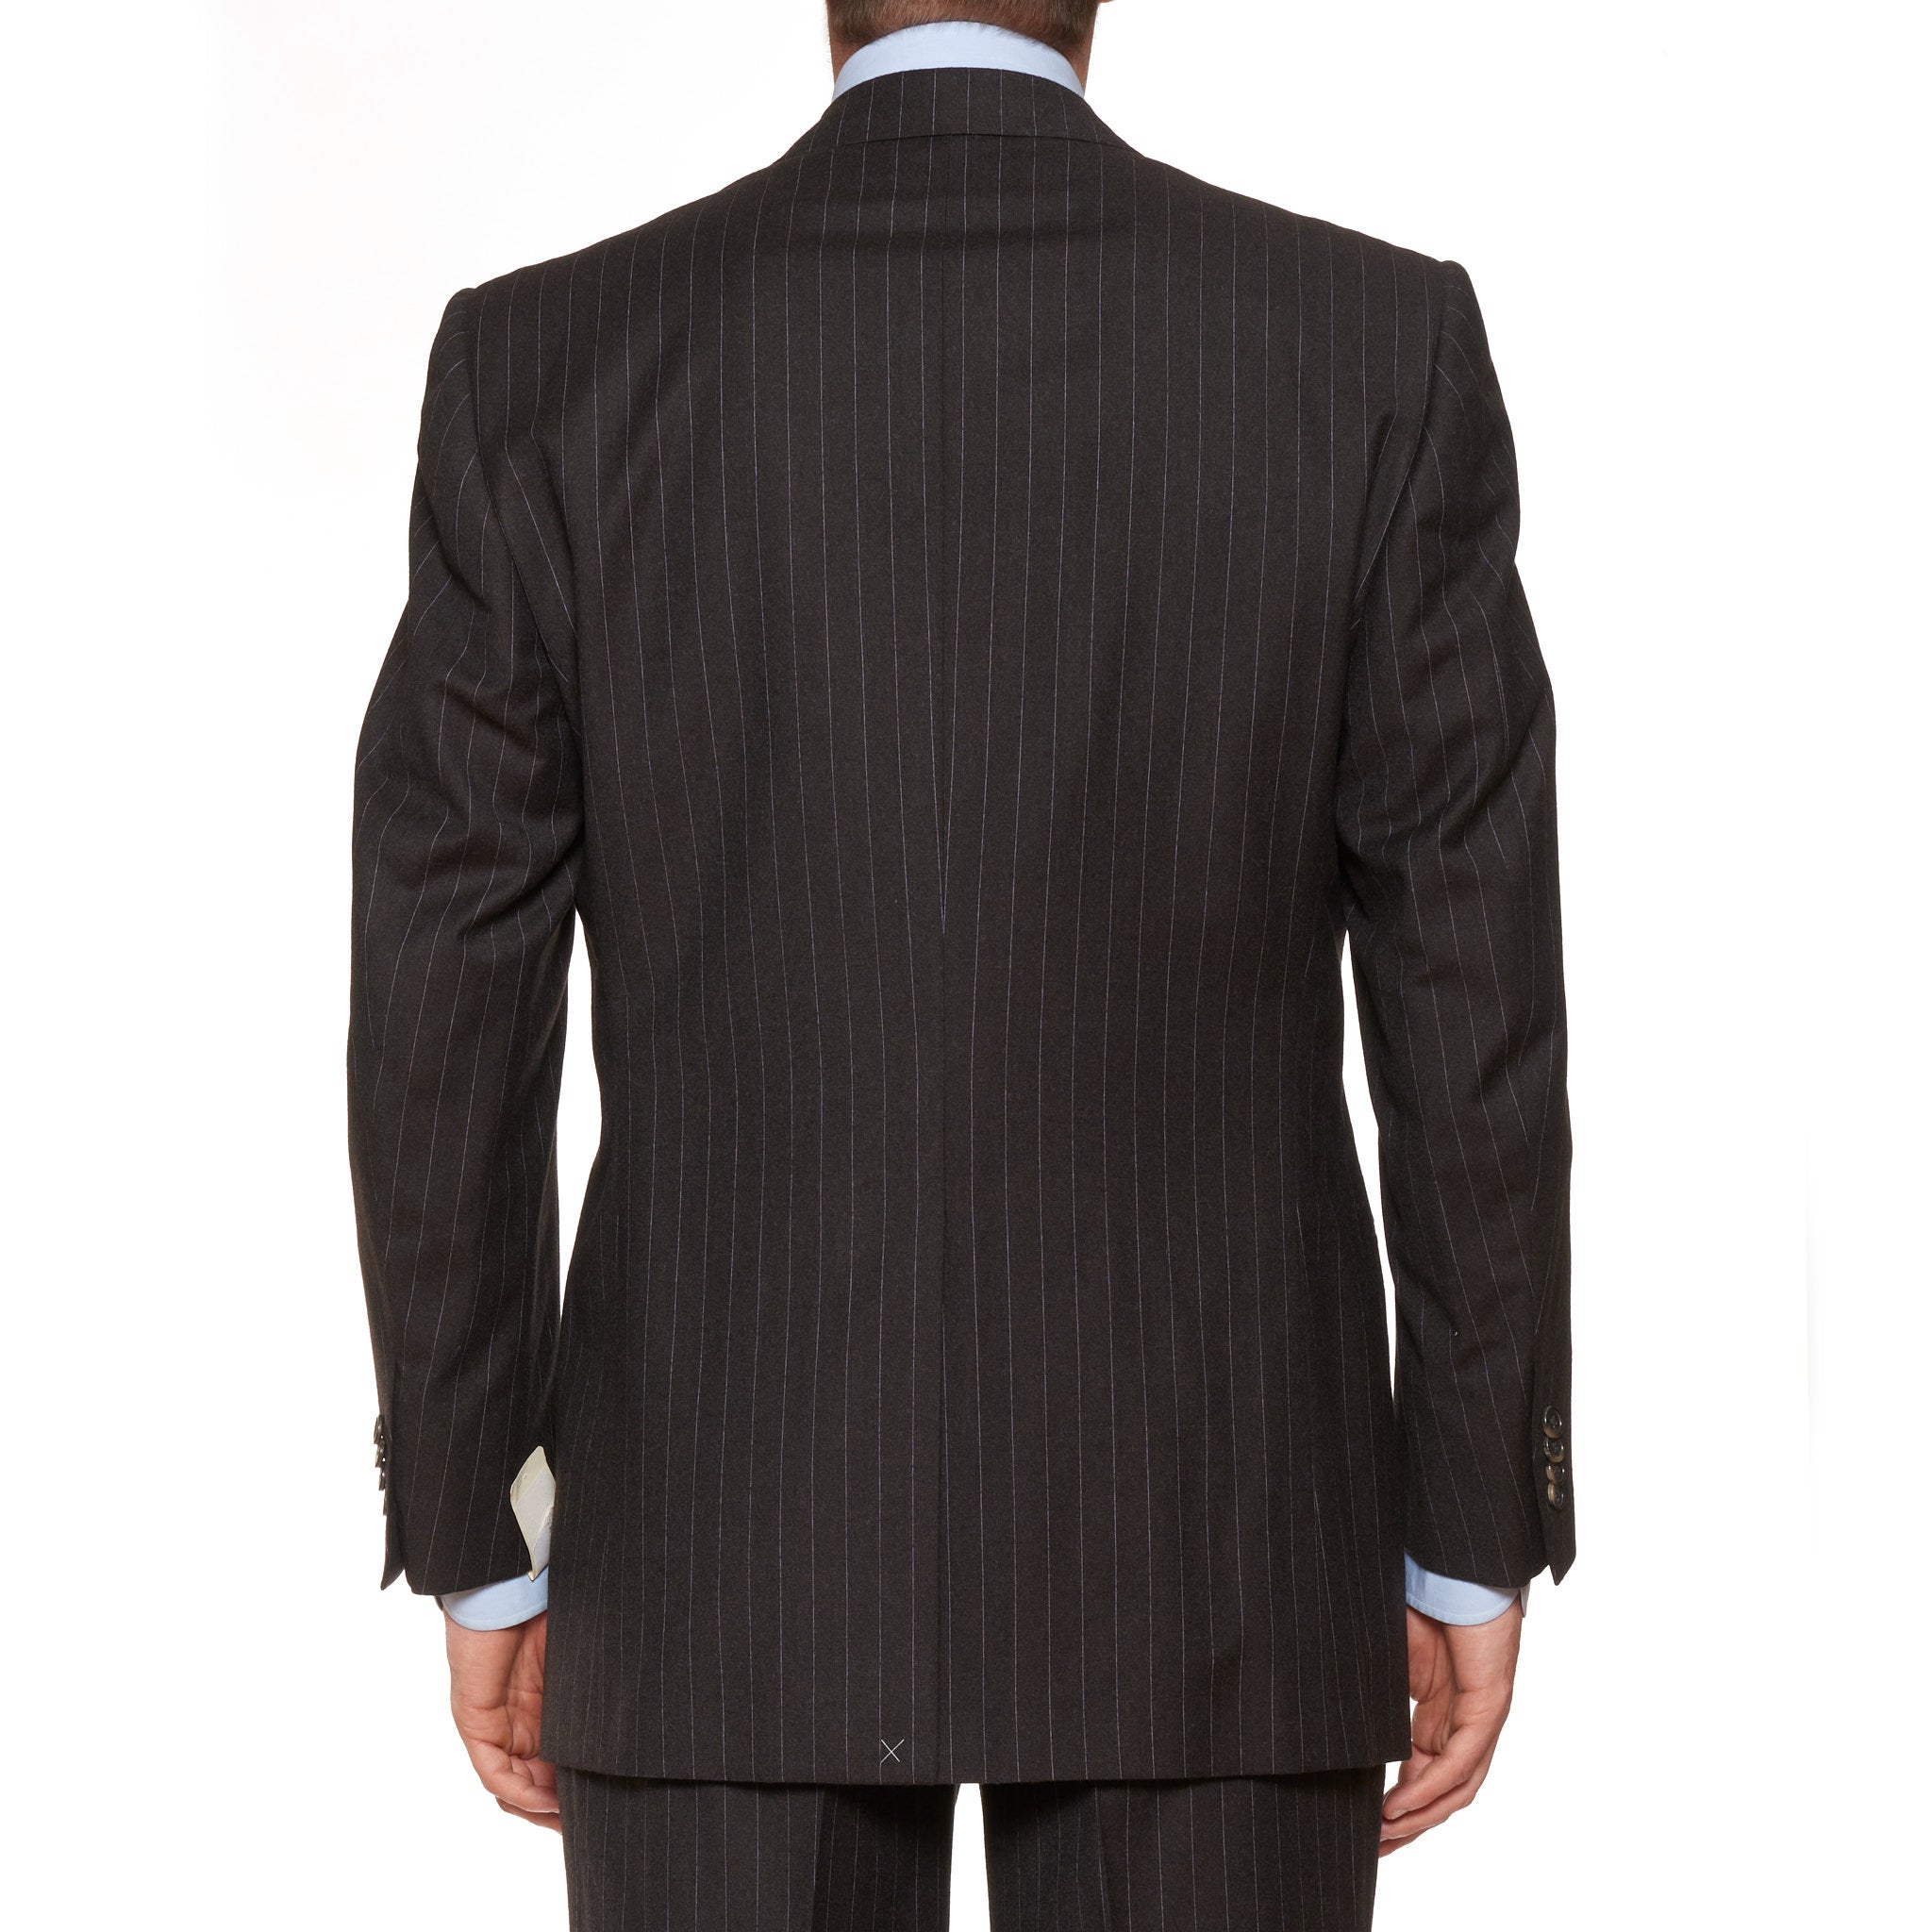 D'AVENZA Handmade Brown Striped Wool Super 130's Flannel DB Suit EU 50 NEW US 40 D'AVENZA